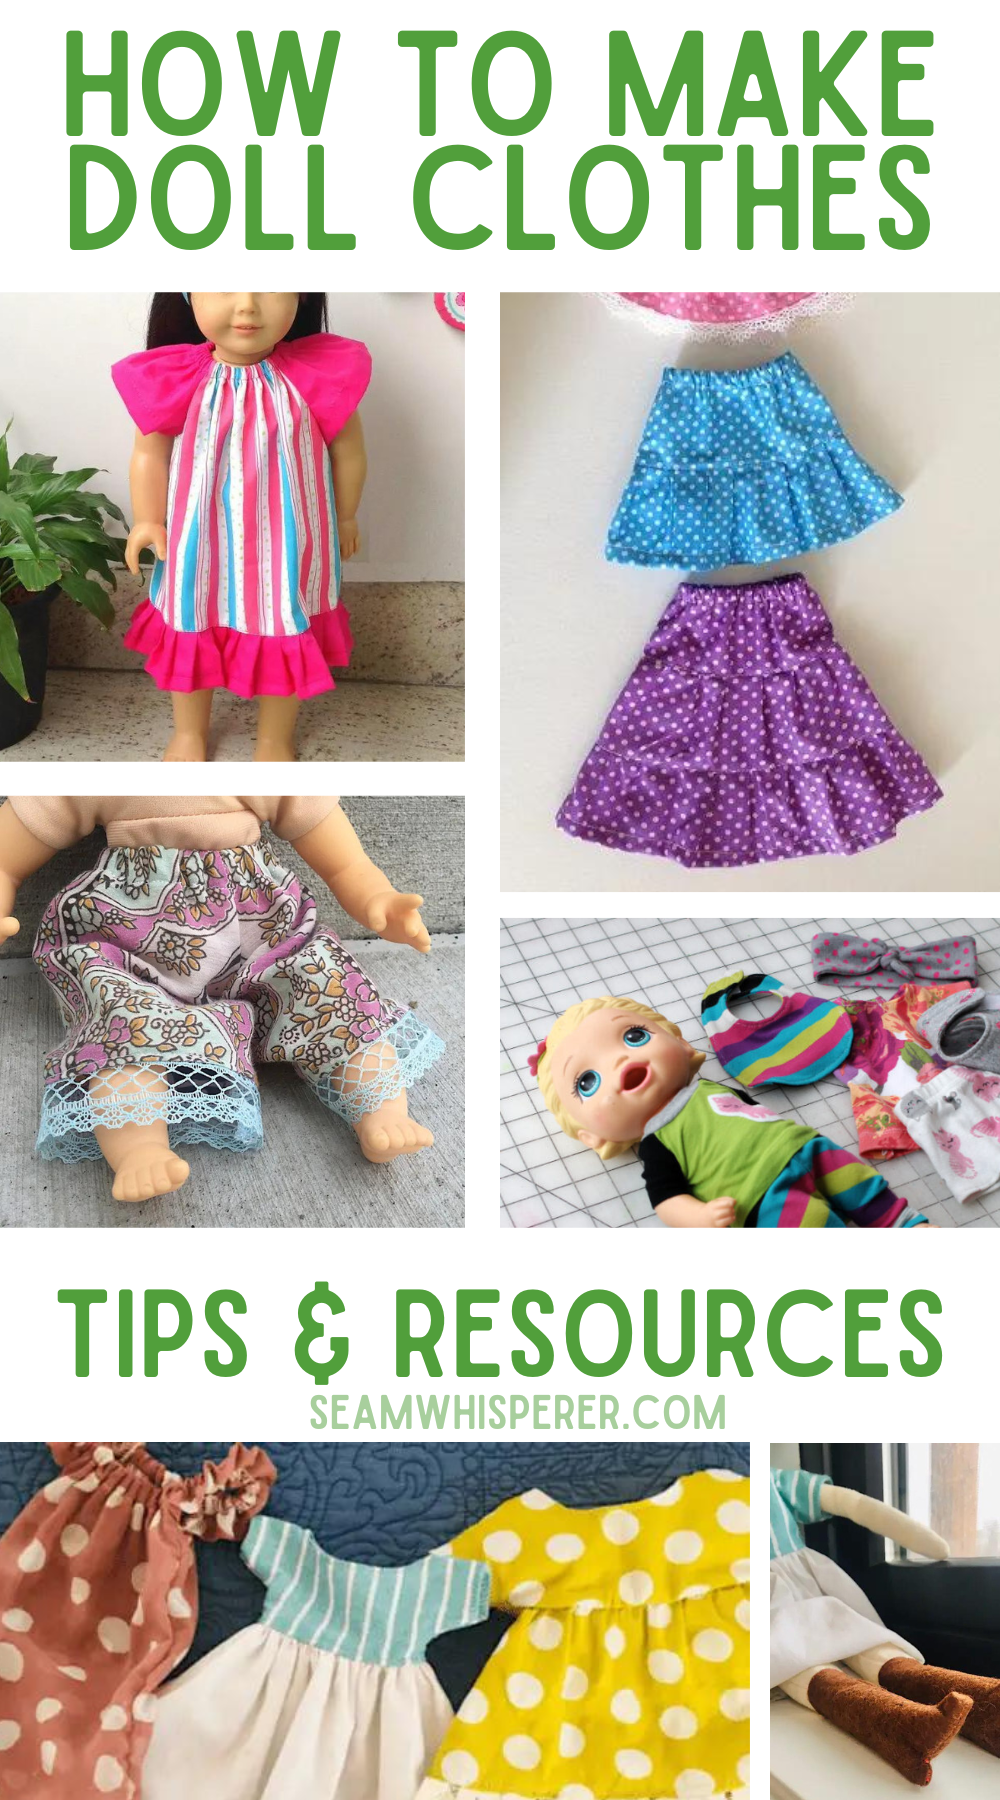 Sewing 101: Let's Talk About Fabric - Resources for a Handmade